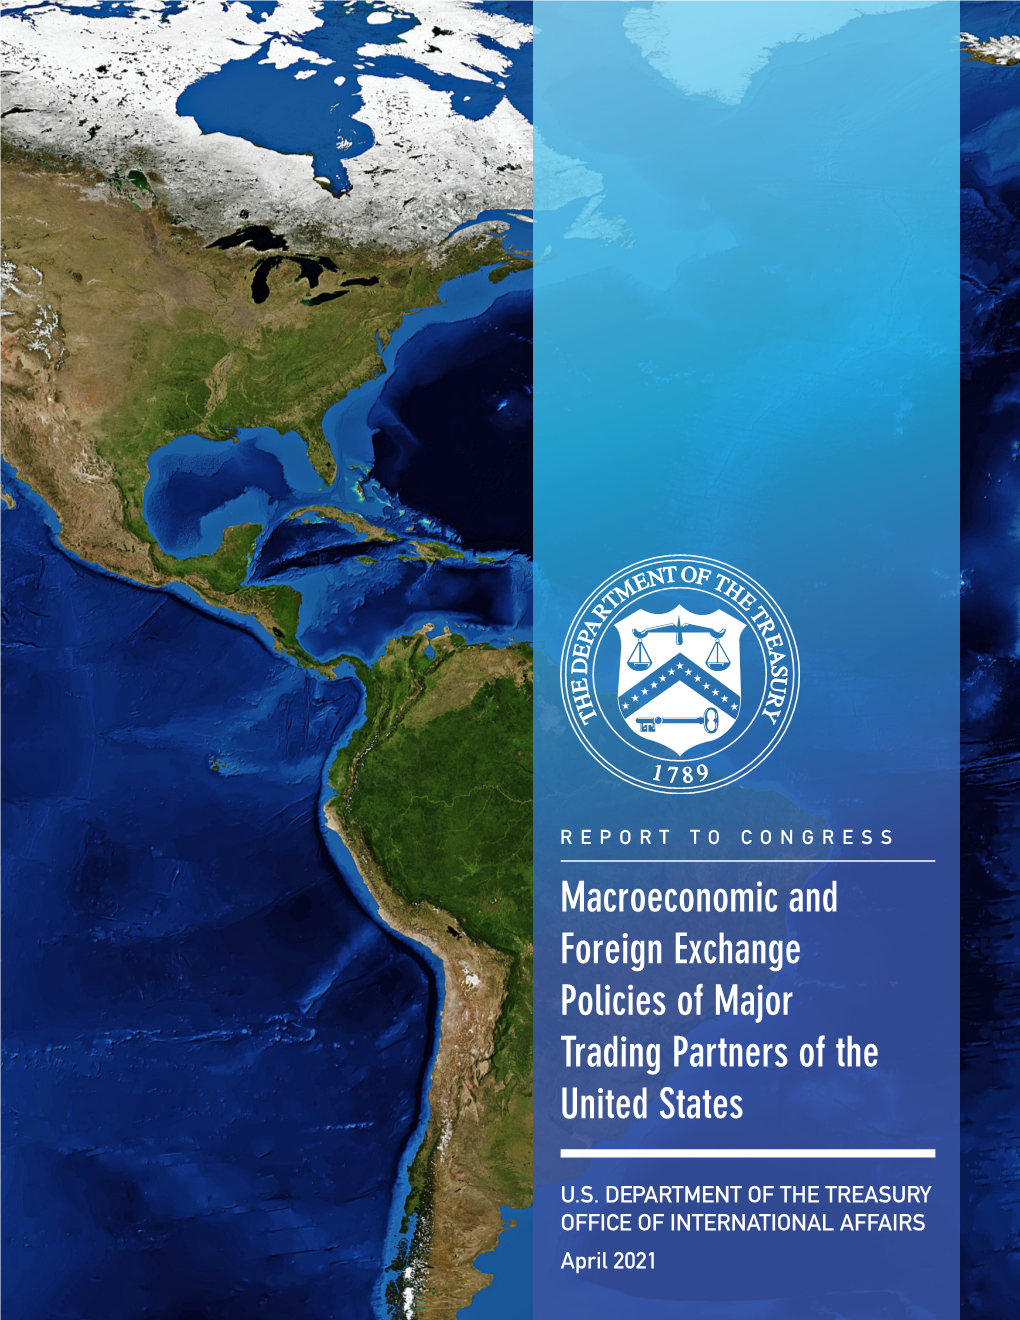 Exchange Policies of Major Trading Partners of the United States